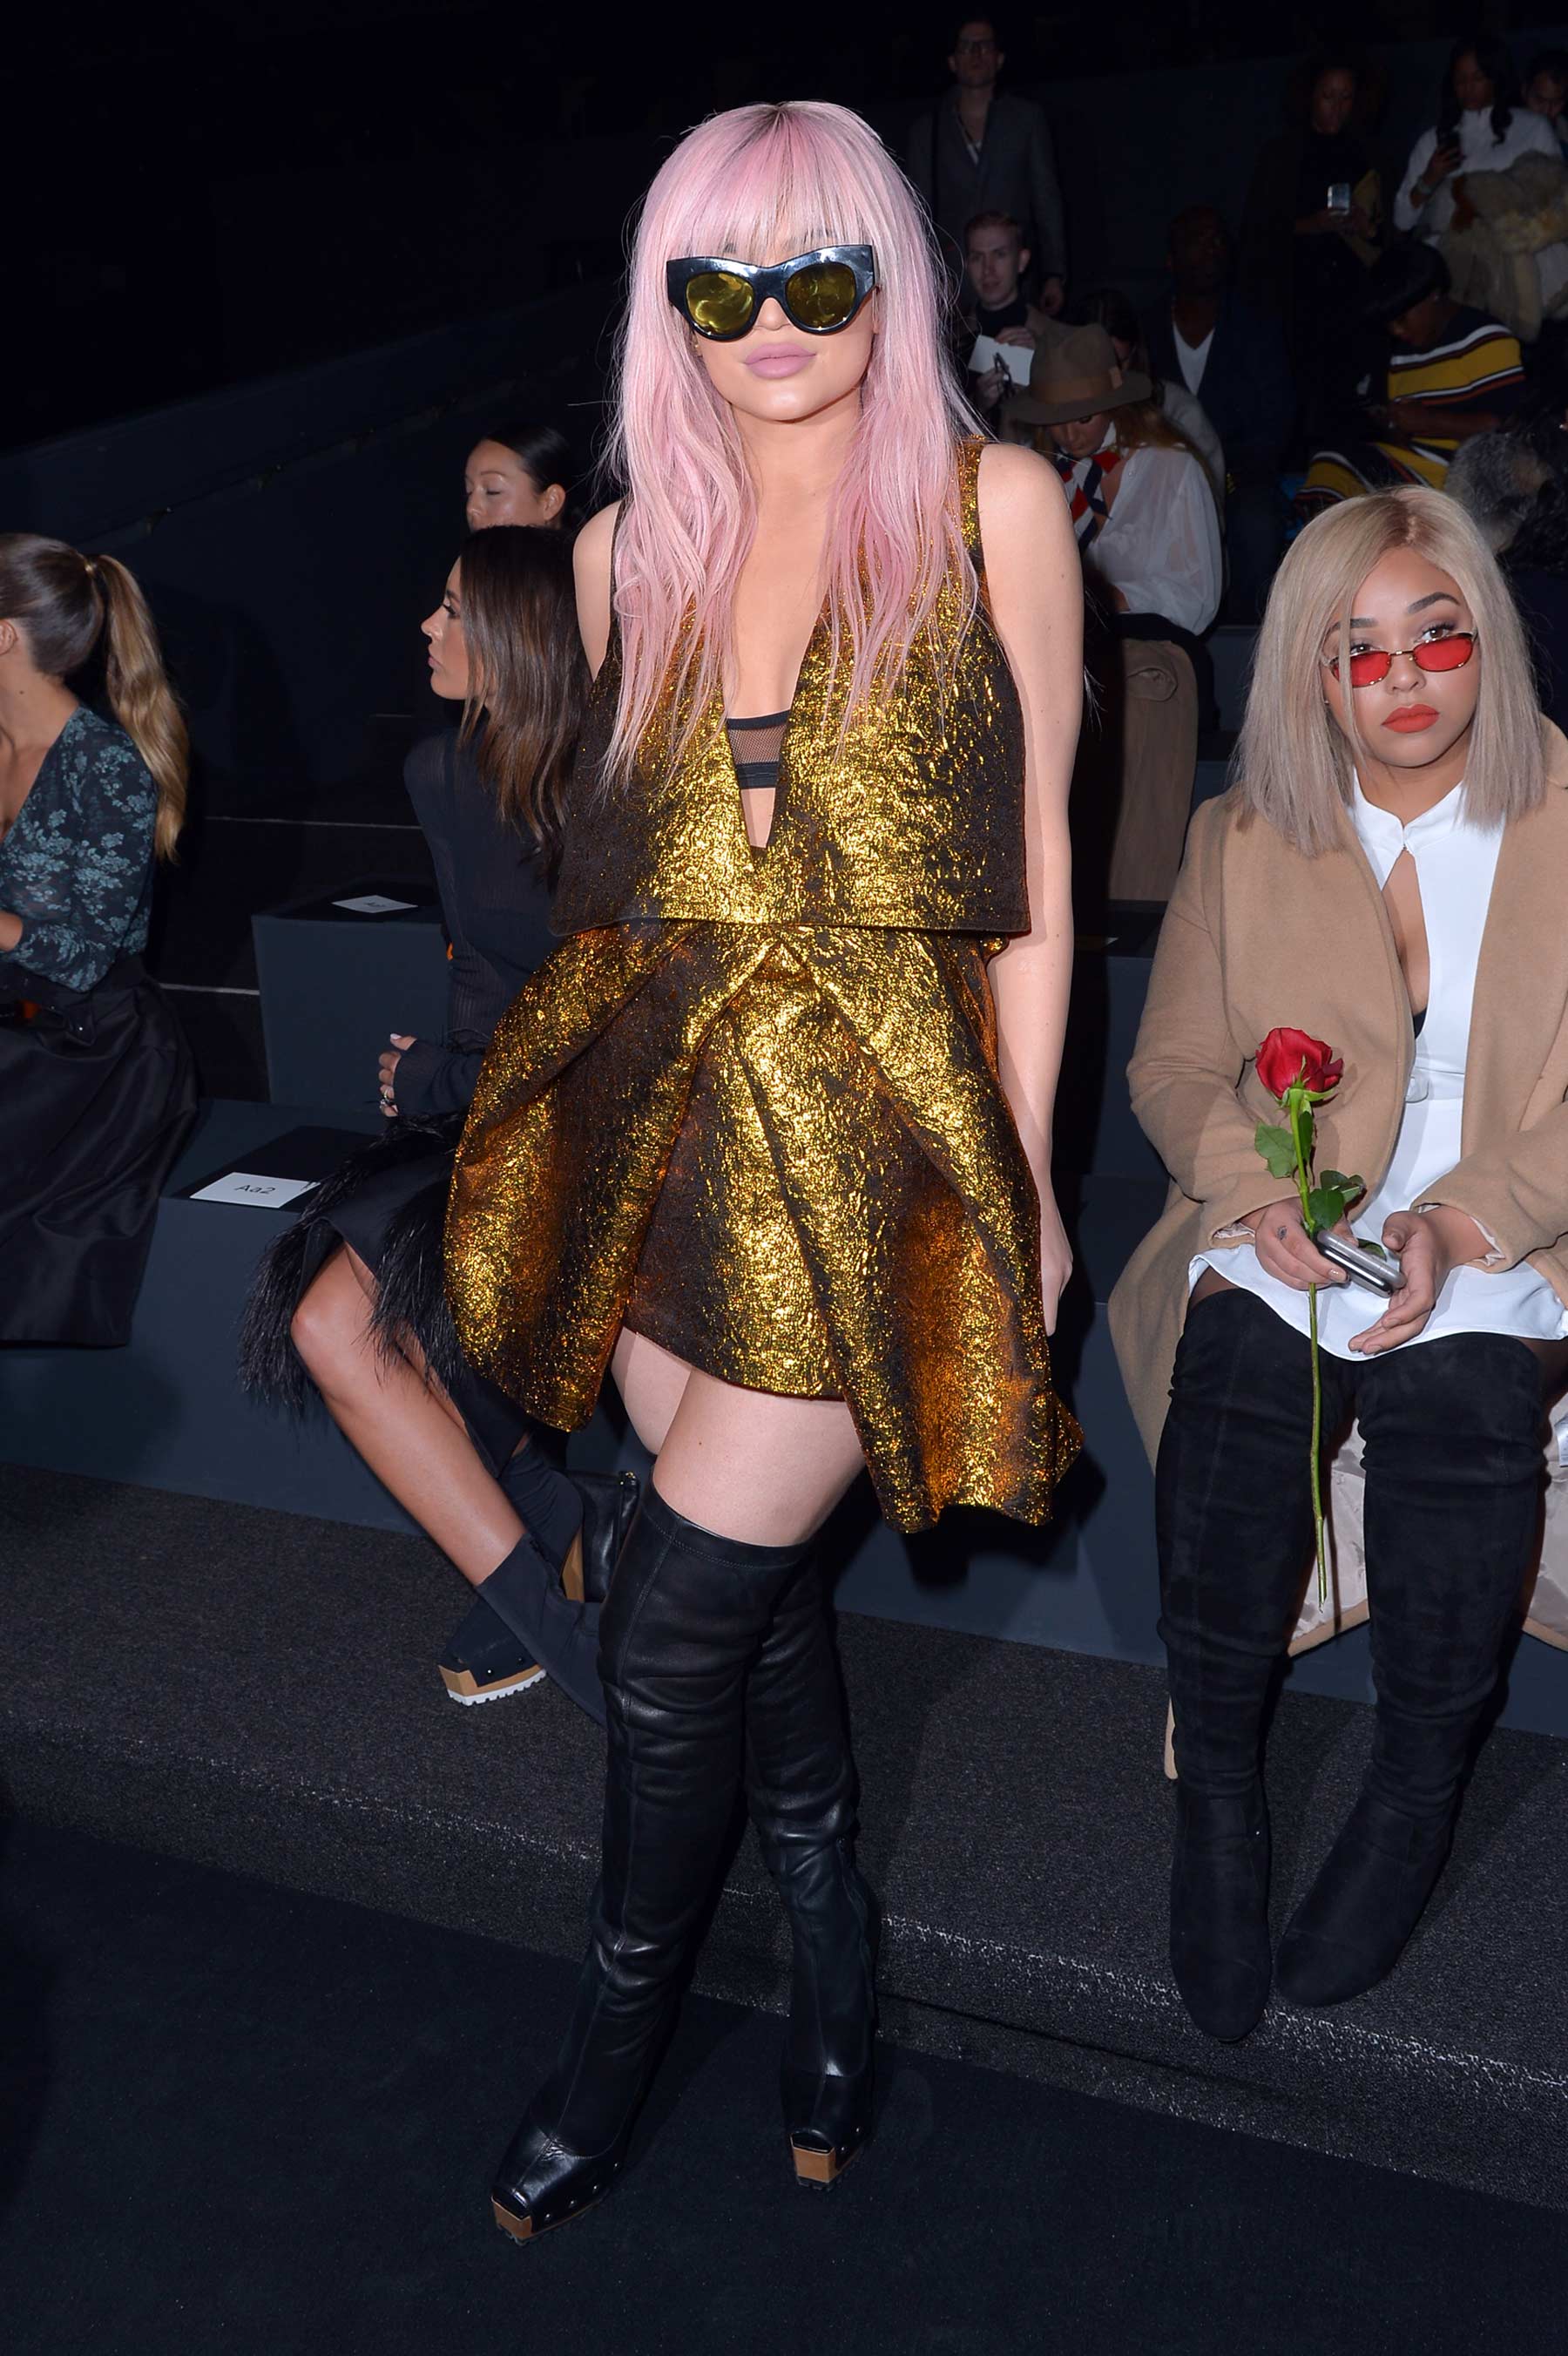 Kylie Jenner front row at the Vera Wang Fashion Show